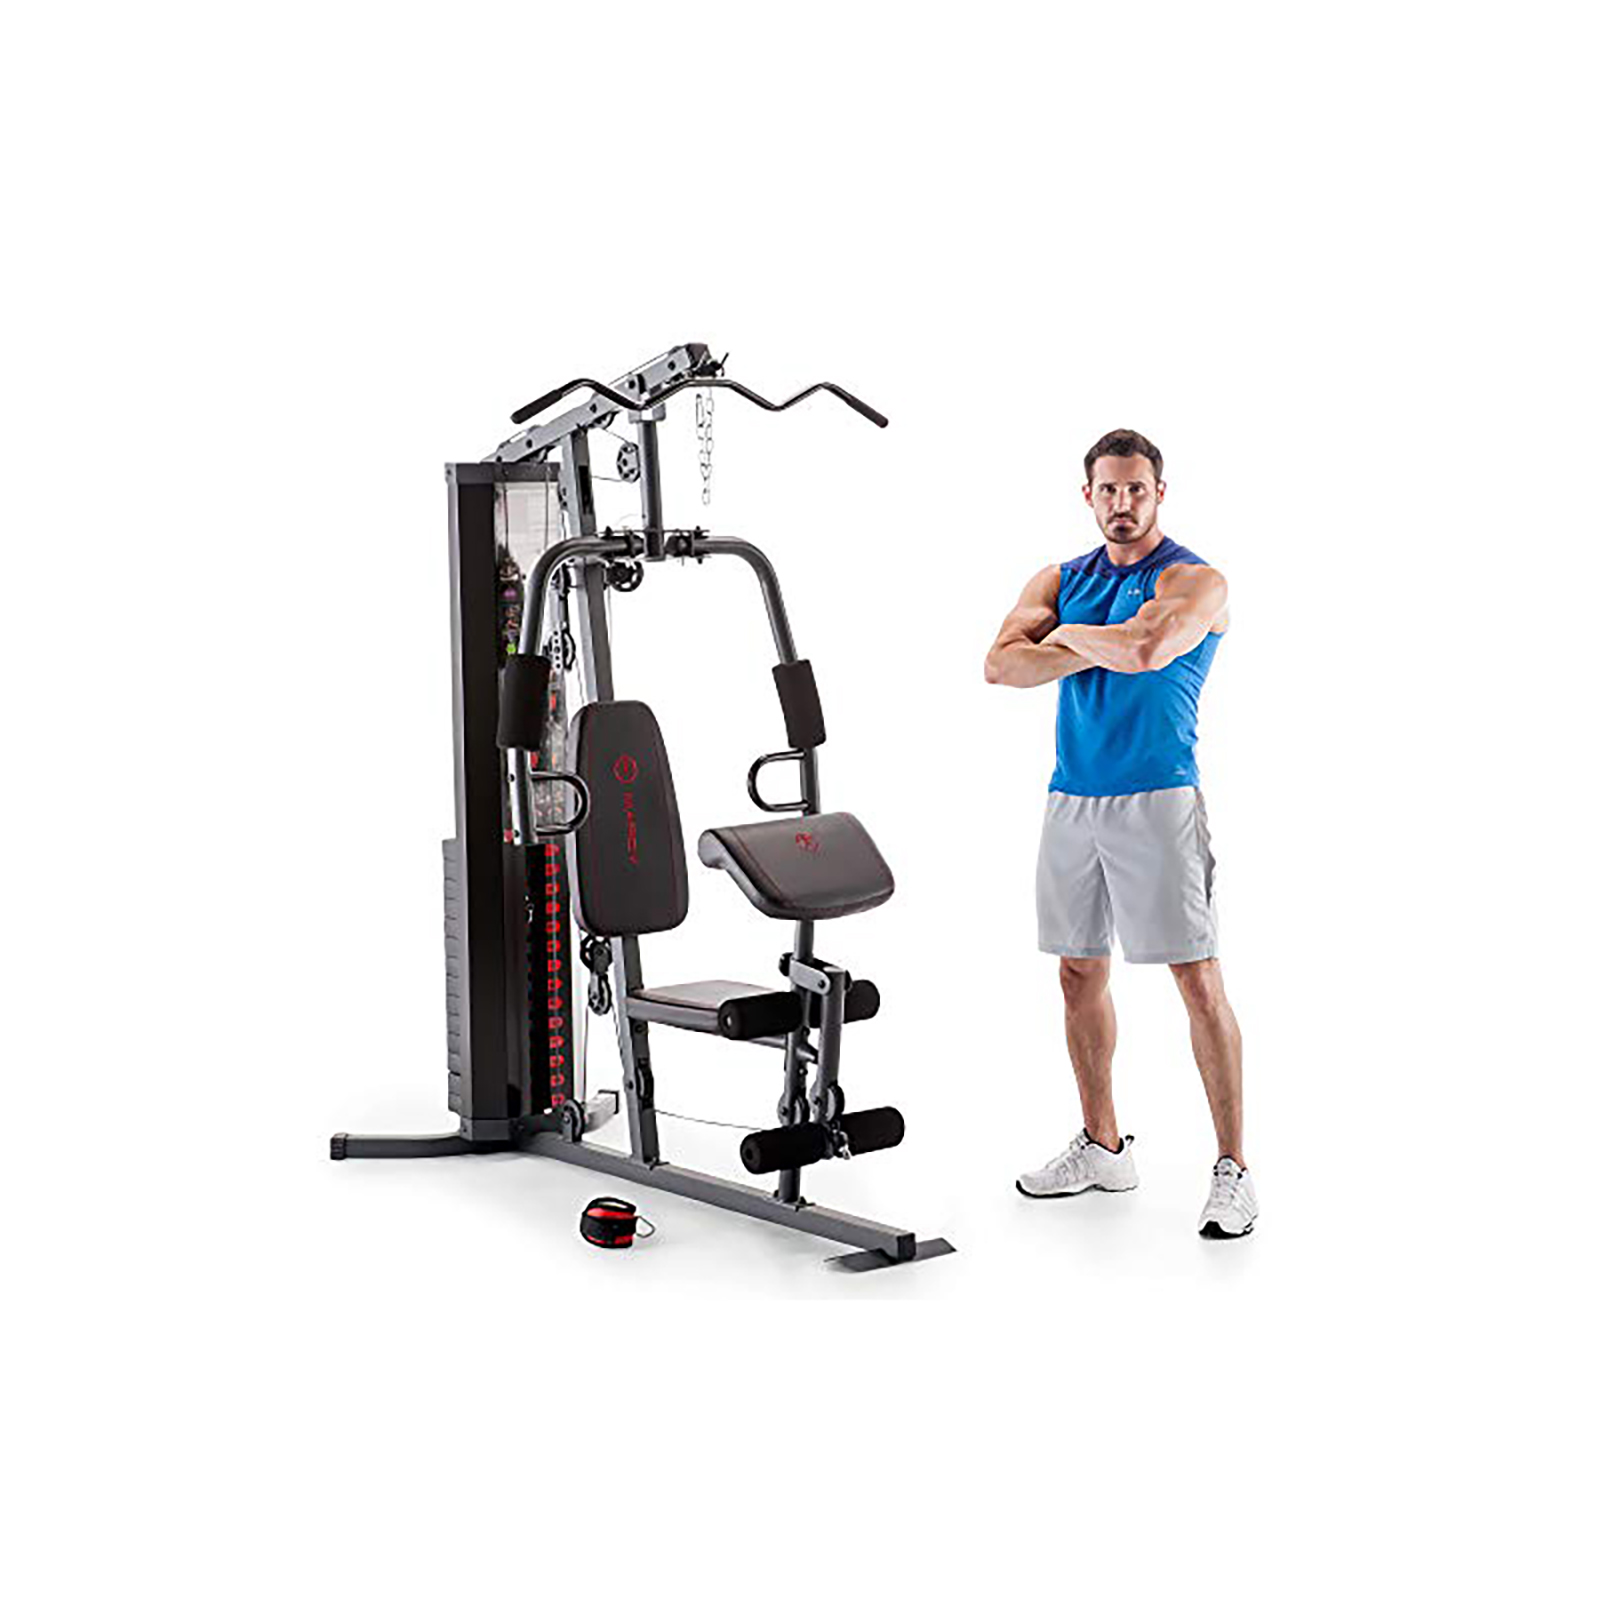 Marcy Fitness 150lb Multi-functional Home Gym Station